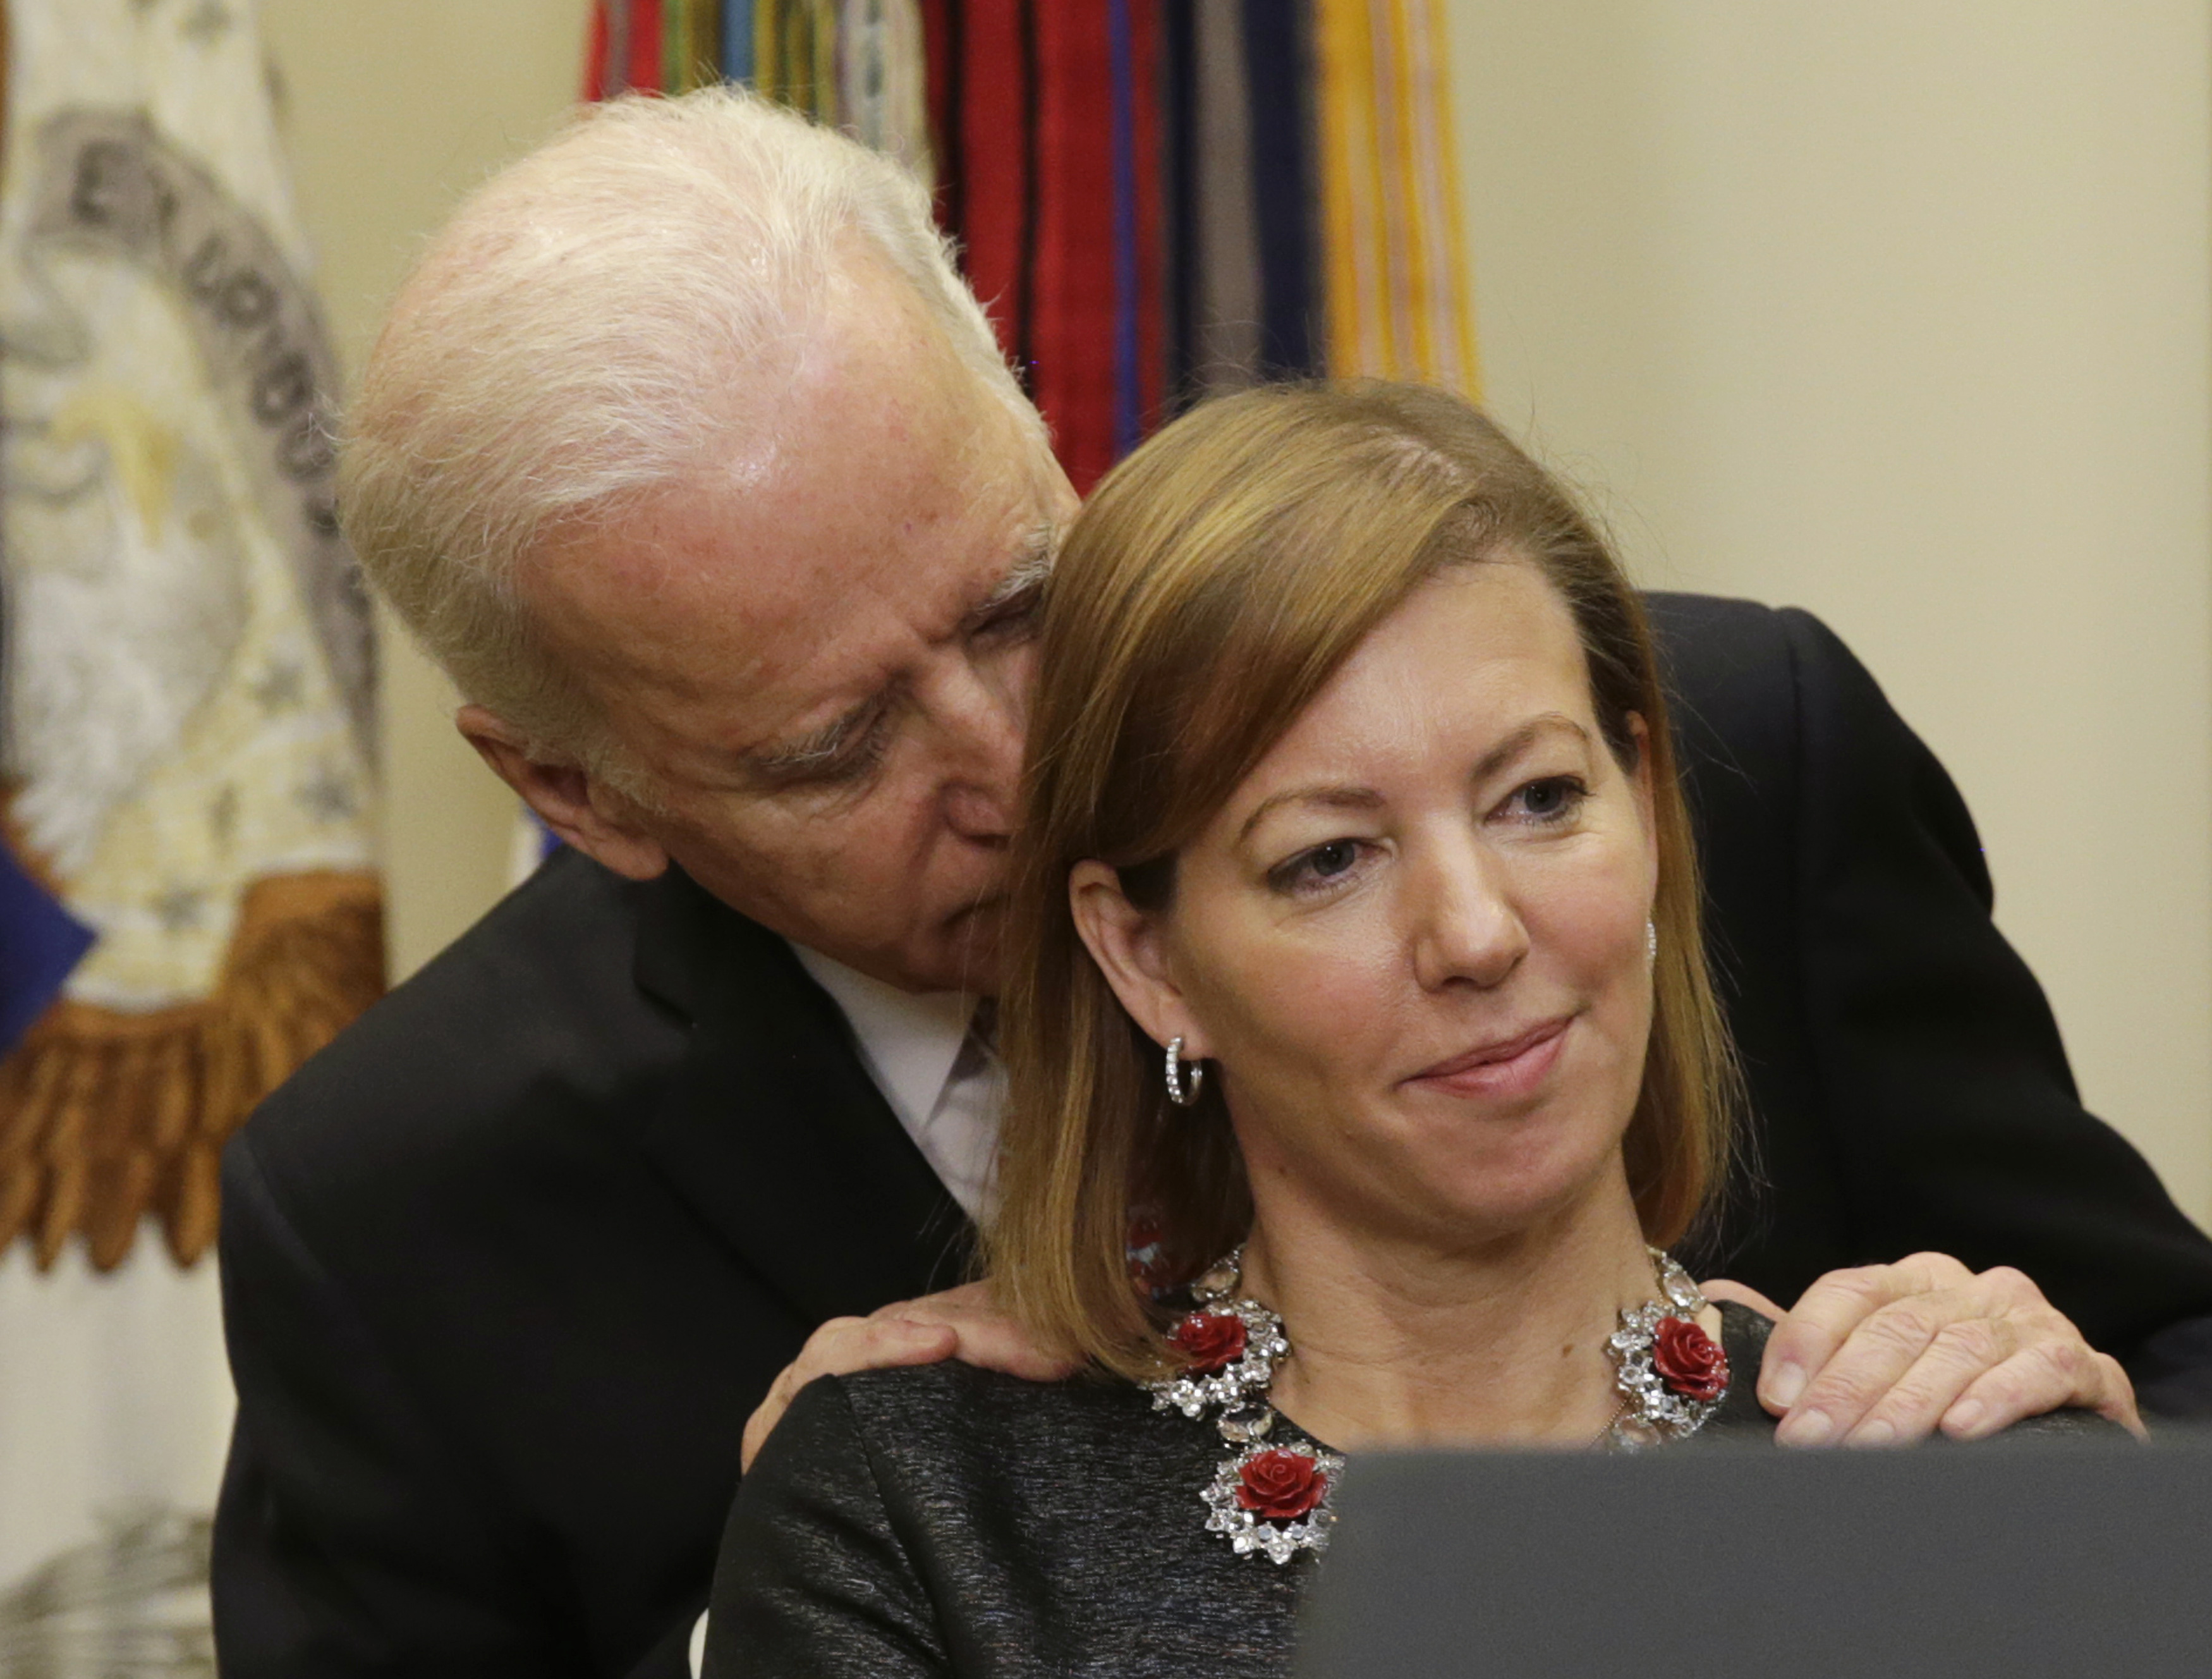 United States Vice President Joe Biden talks to Stephanie Carter (R) as her husband Ash Carter (not pictured) delivers his acceptance speech TPX IMAGES OF THE DAY) - GM1EB2I02FA01